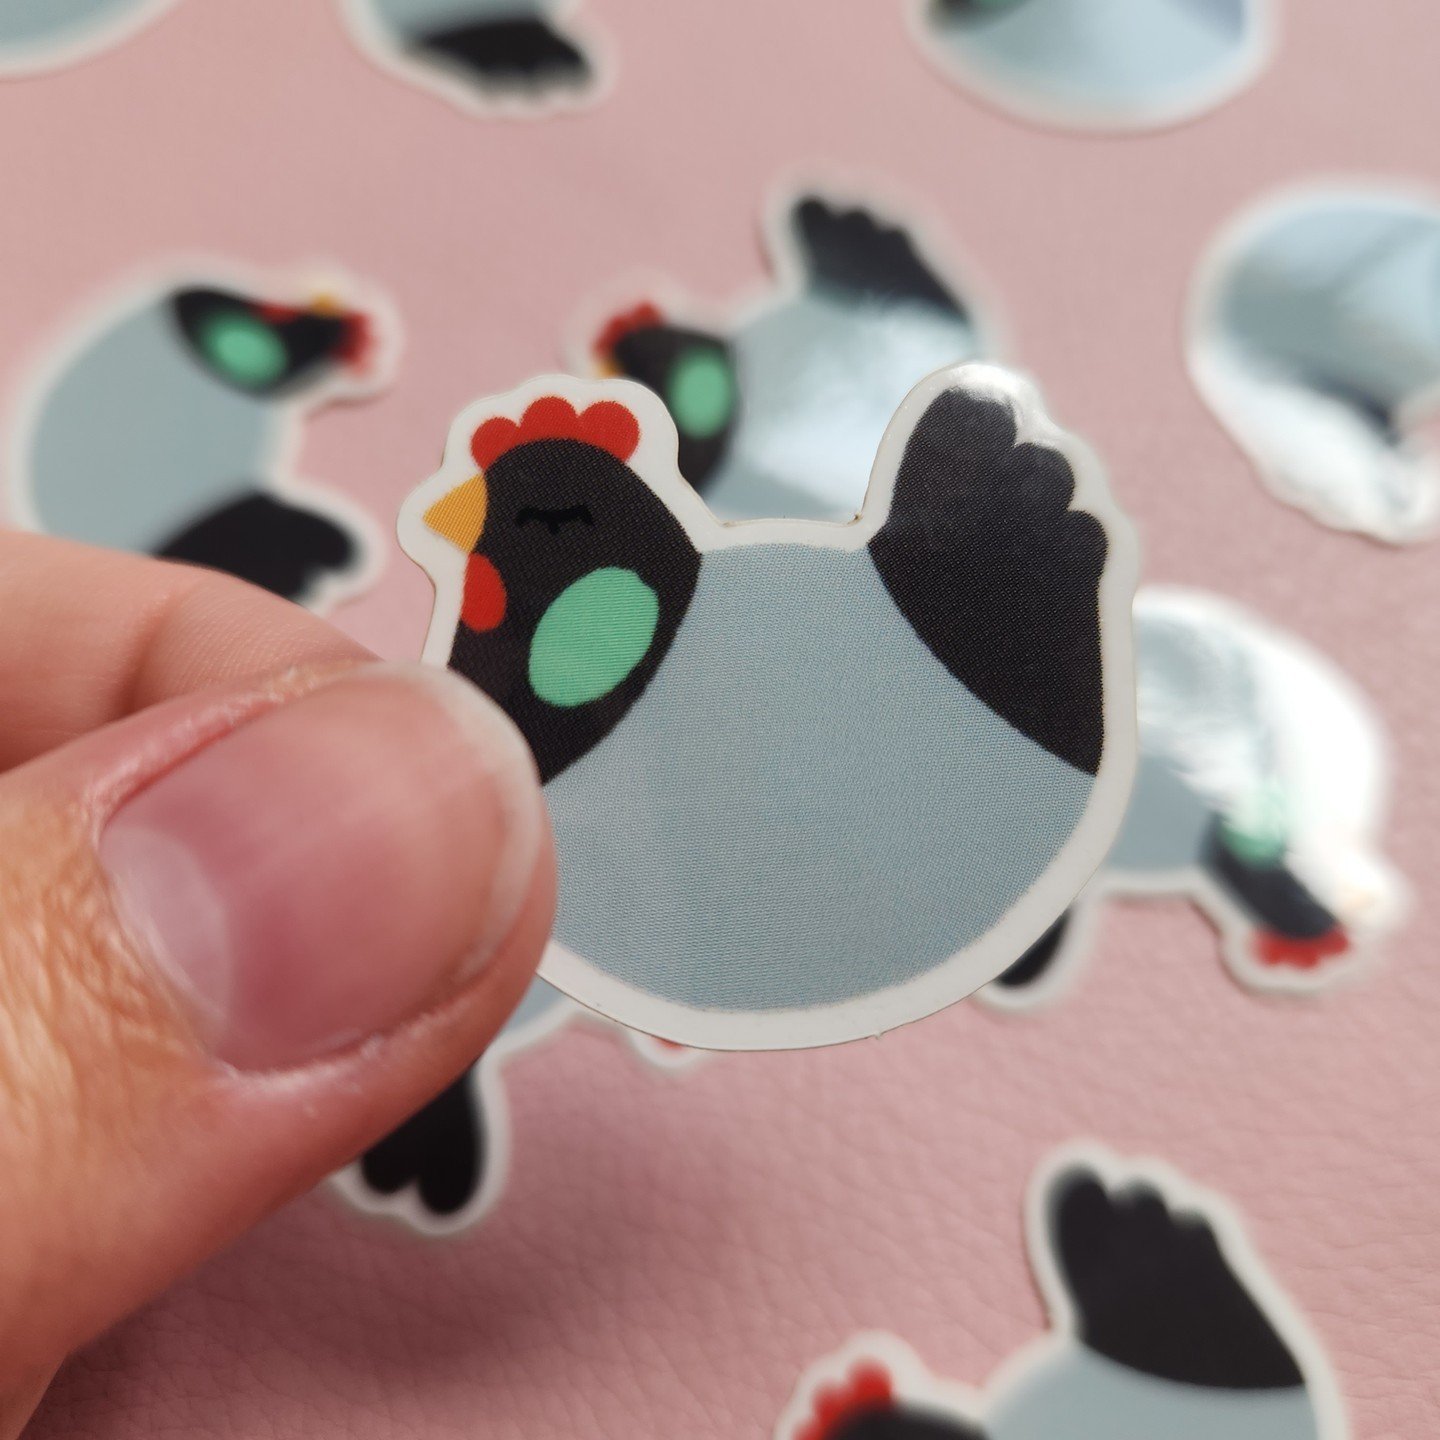 May Sticker Club: Pigehen! Shhhh, a perfectly Normal Pigeon
May 2nd deadline to get this flat lady!!
&bull;waterproof
&bull;weatherproof
&bull;transparent edges
&bull;glossy finish
&bull;1.3&quot;x1.2&quot;
Join in my shop :) #chickens #tinyglass #ba